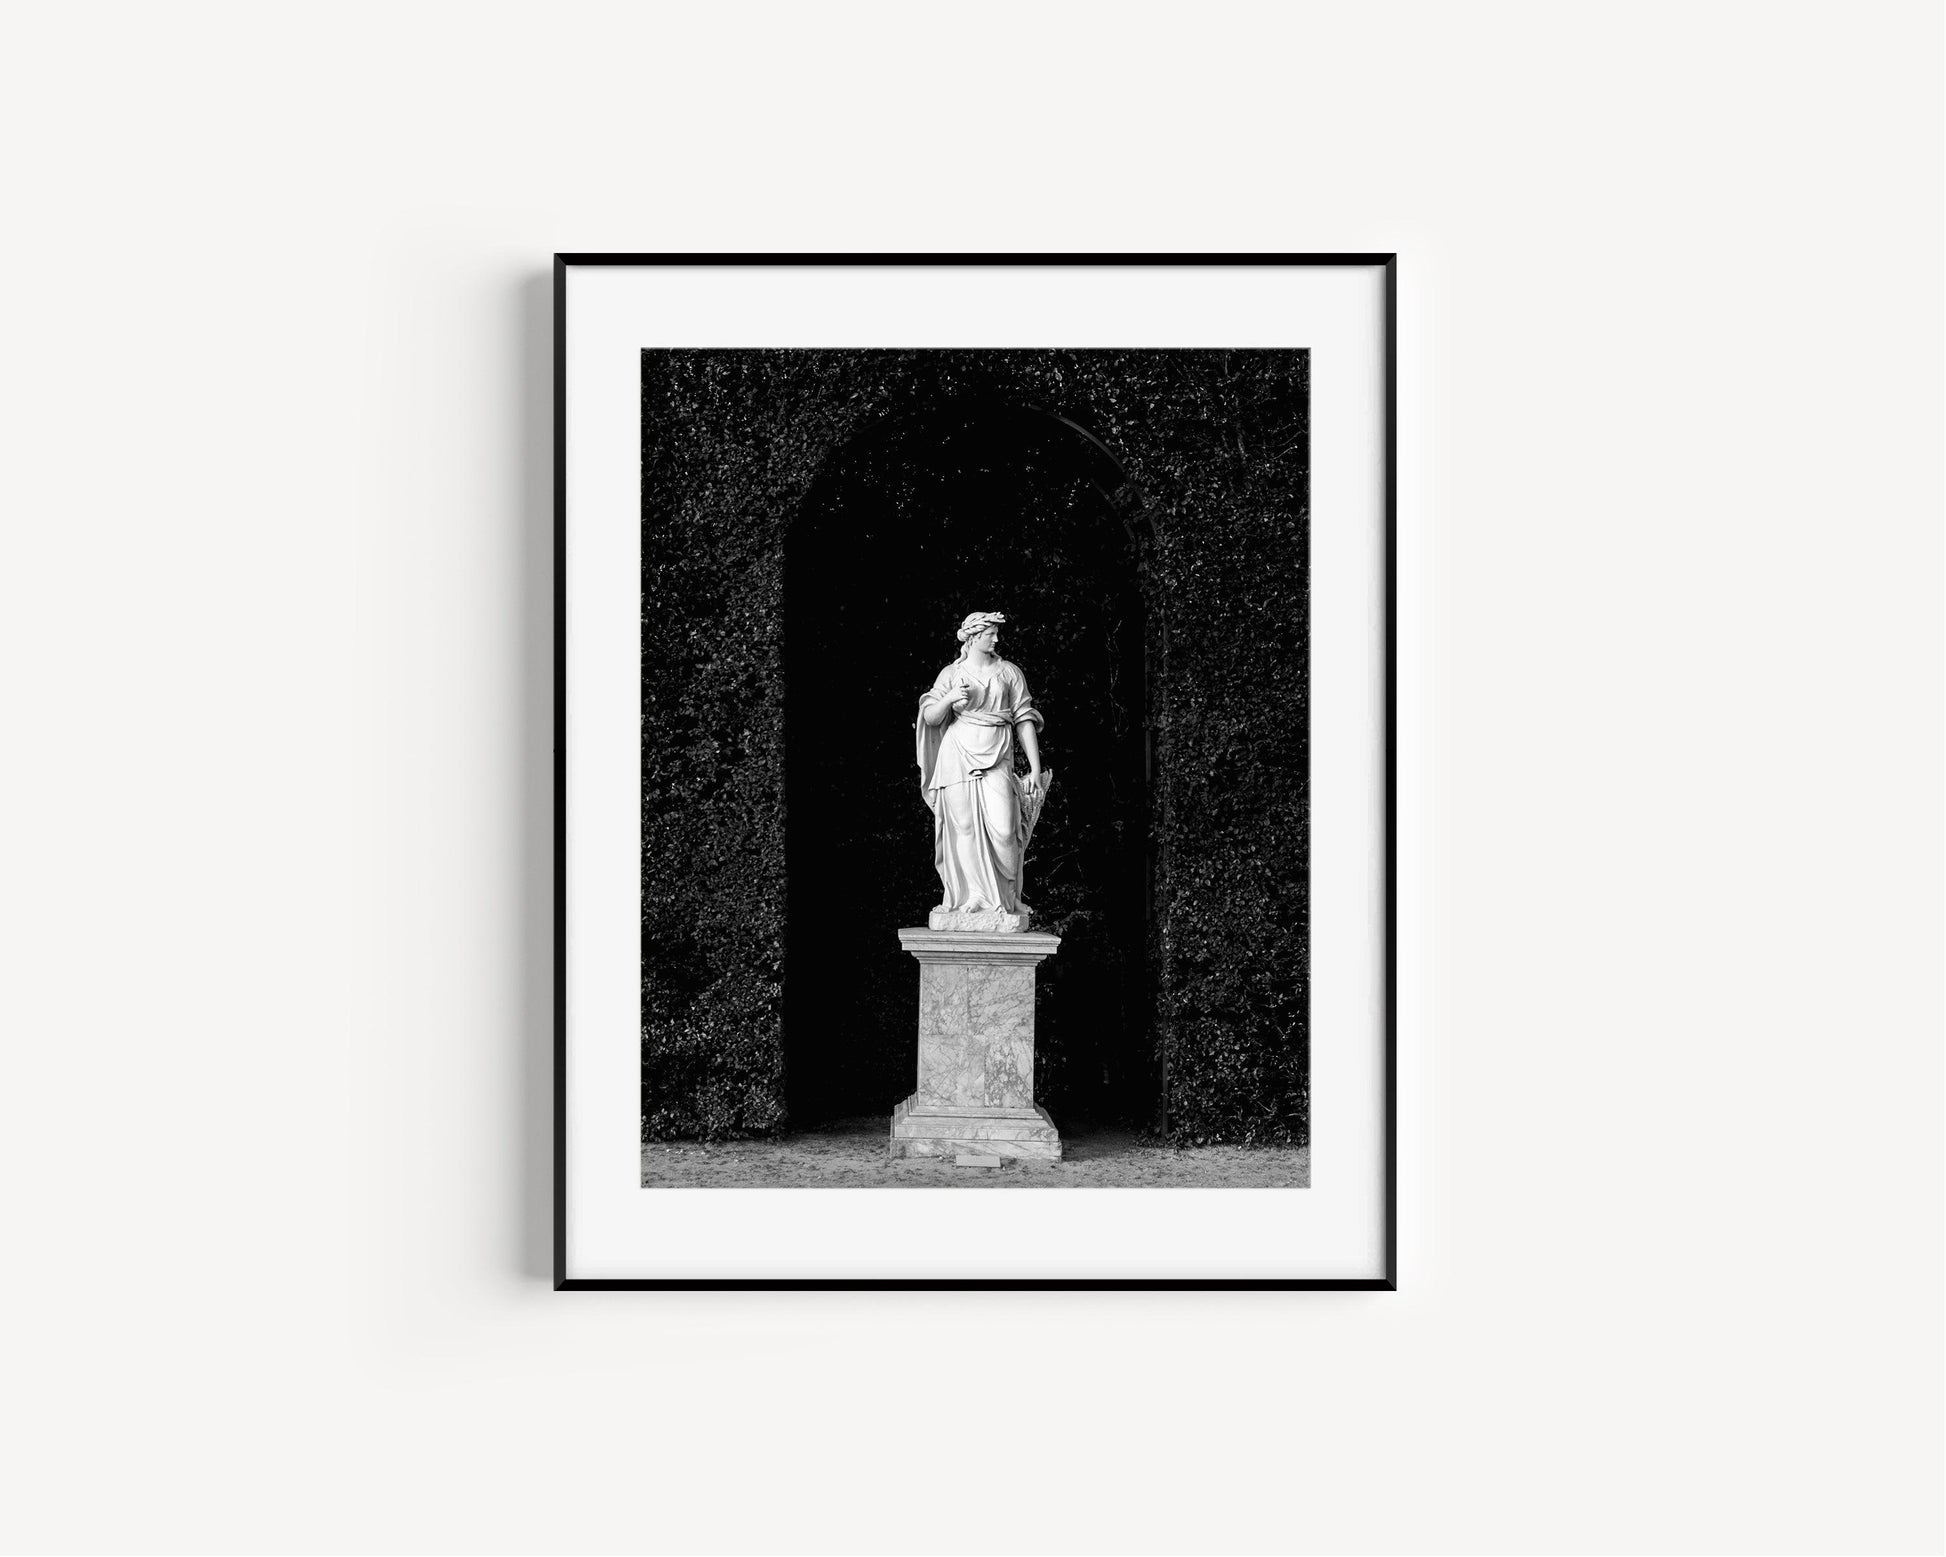 Black and White Gardens of Versailles Statue Photography Print - Departures Print Shop